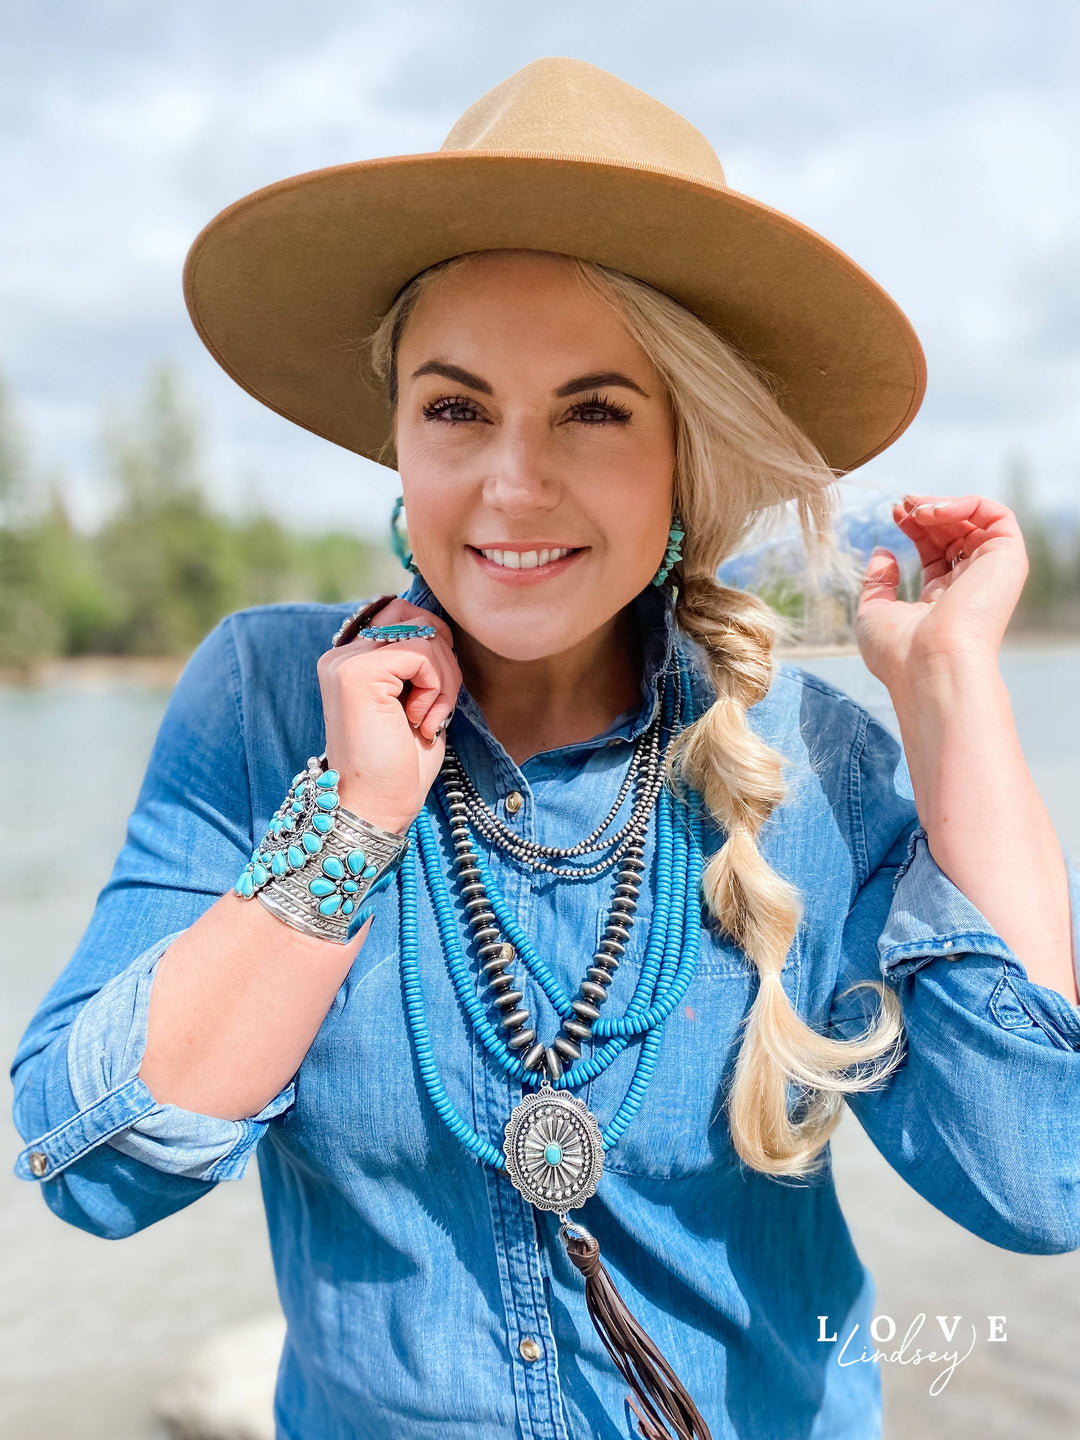 How To Wear Turquoise Jewelry: My Top Styling Tips!